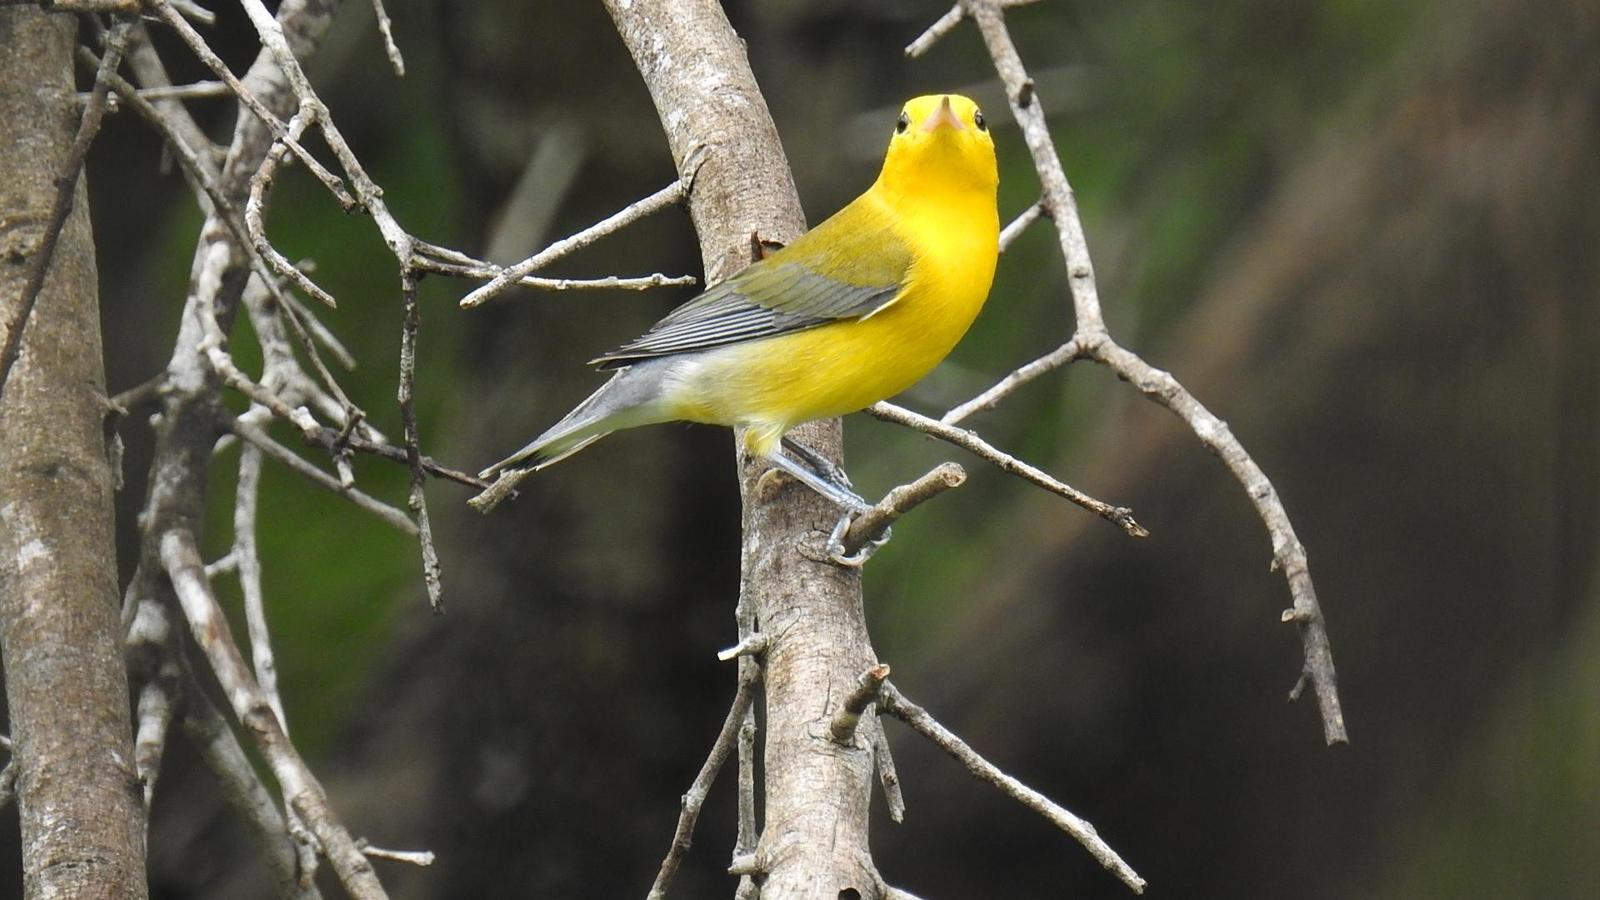 Prothonotary Warbler Photo by Julio Delgado